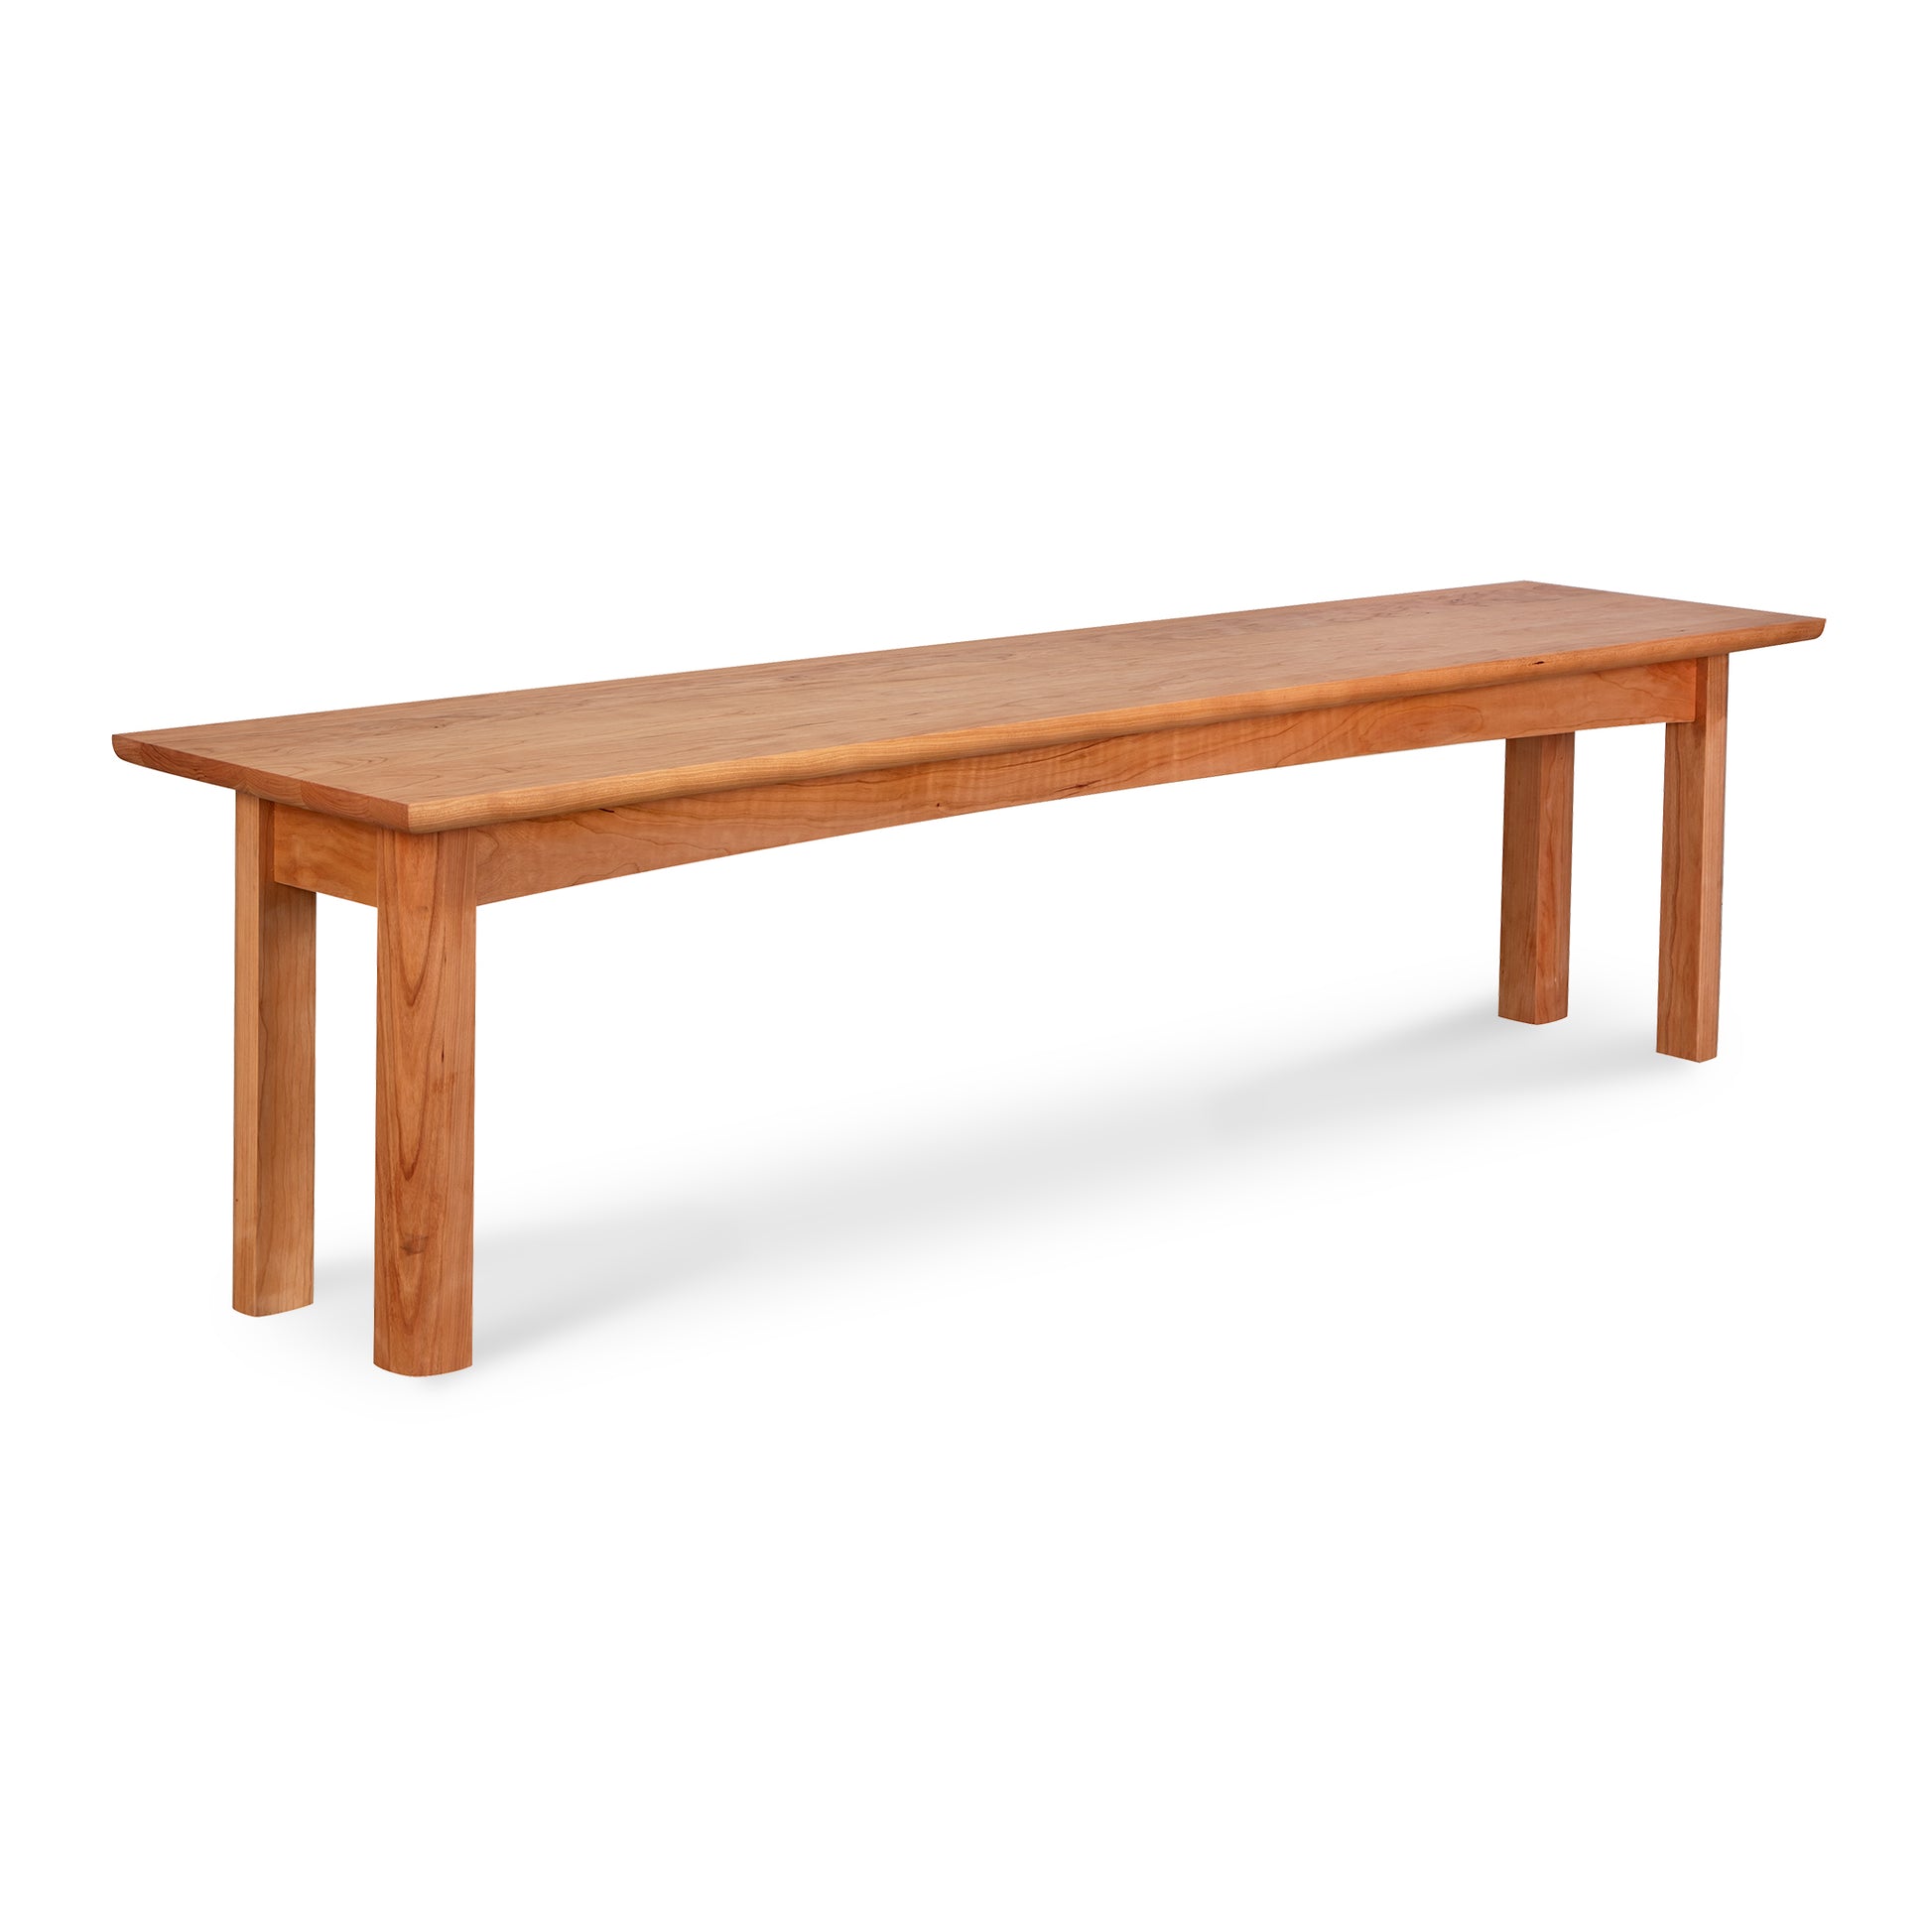 A long Heartwood Shaker Bench from Vermont Furniture Designs against a white background.